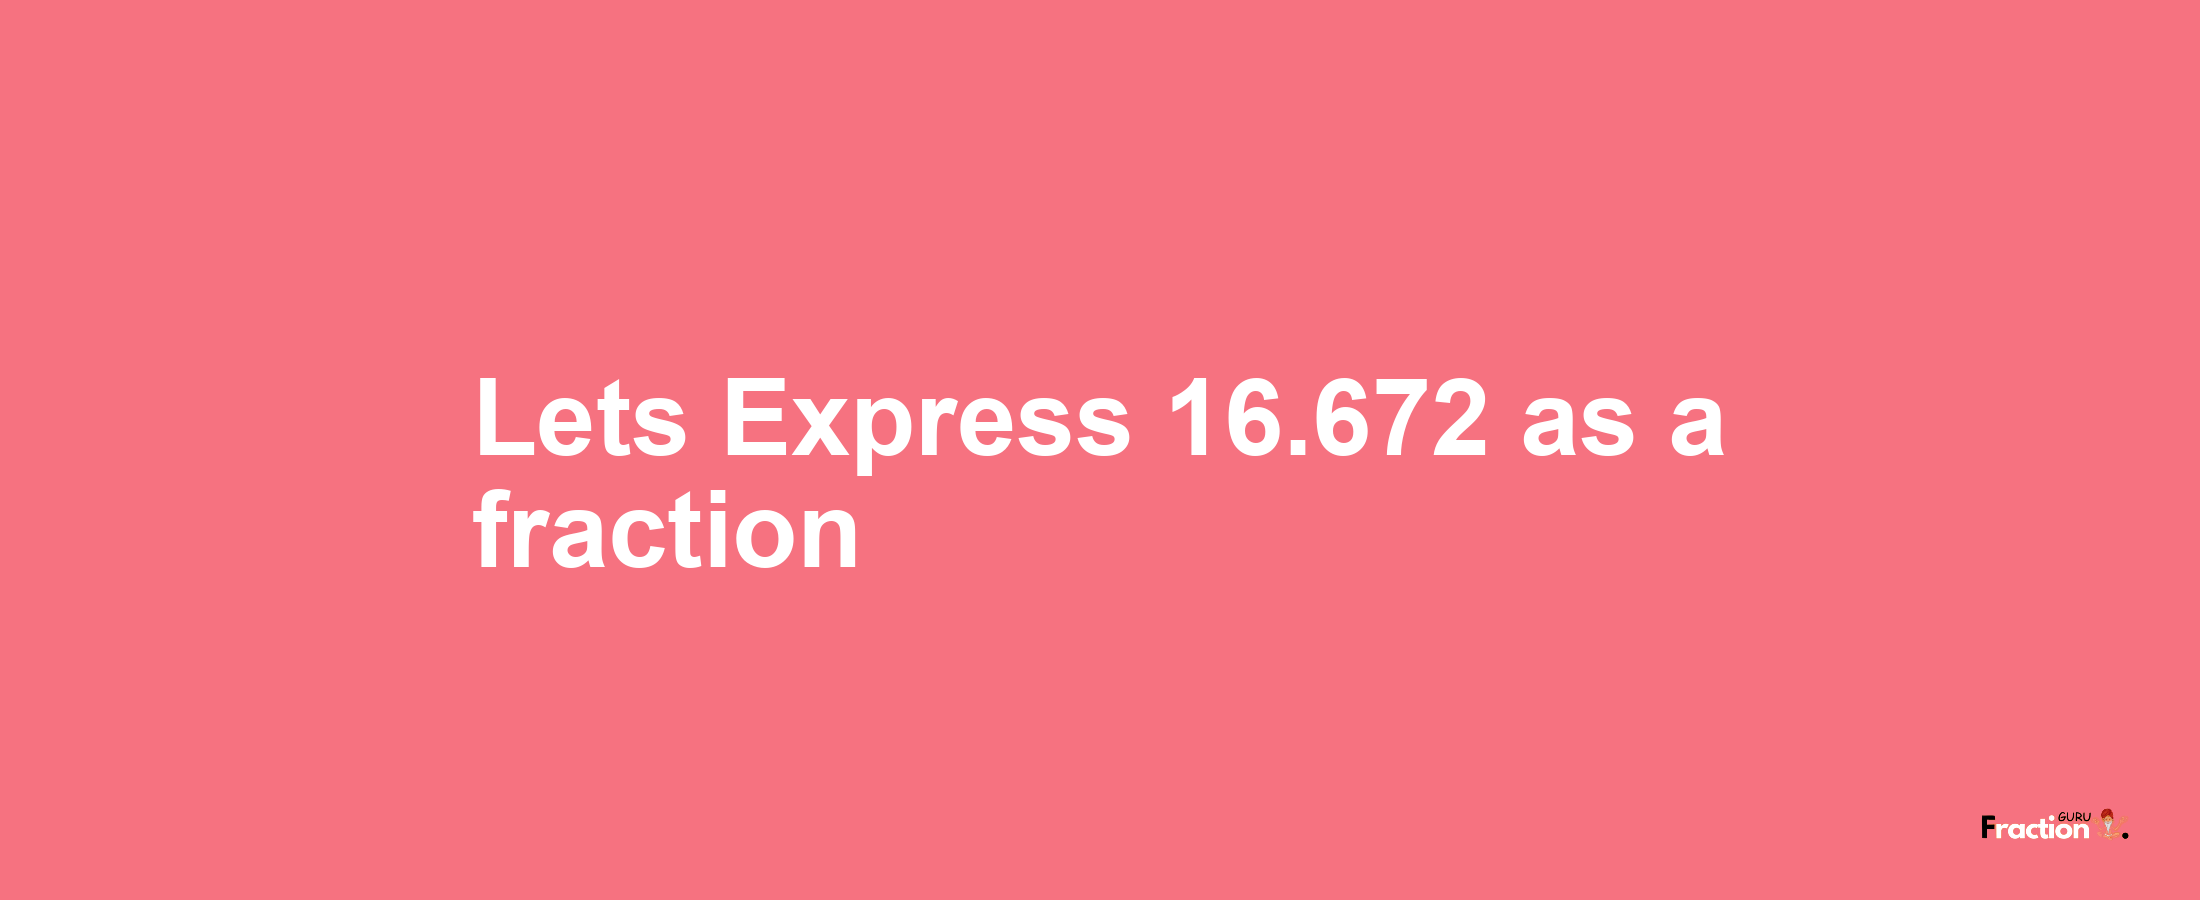 Lets Express 16.672 as afraction